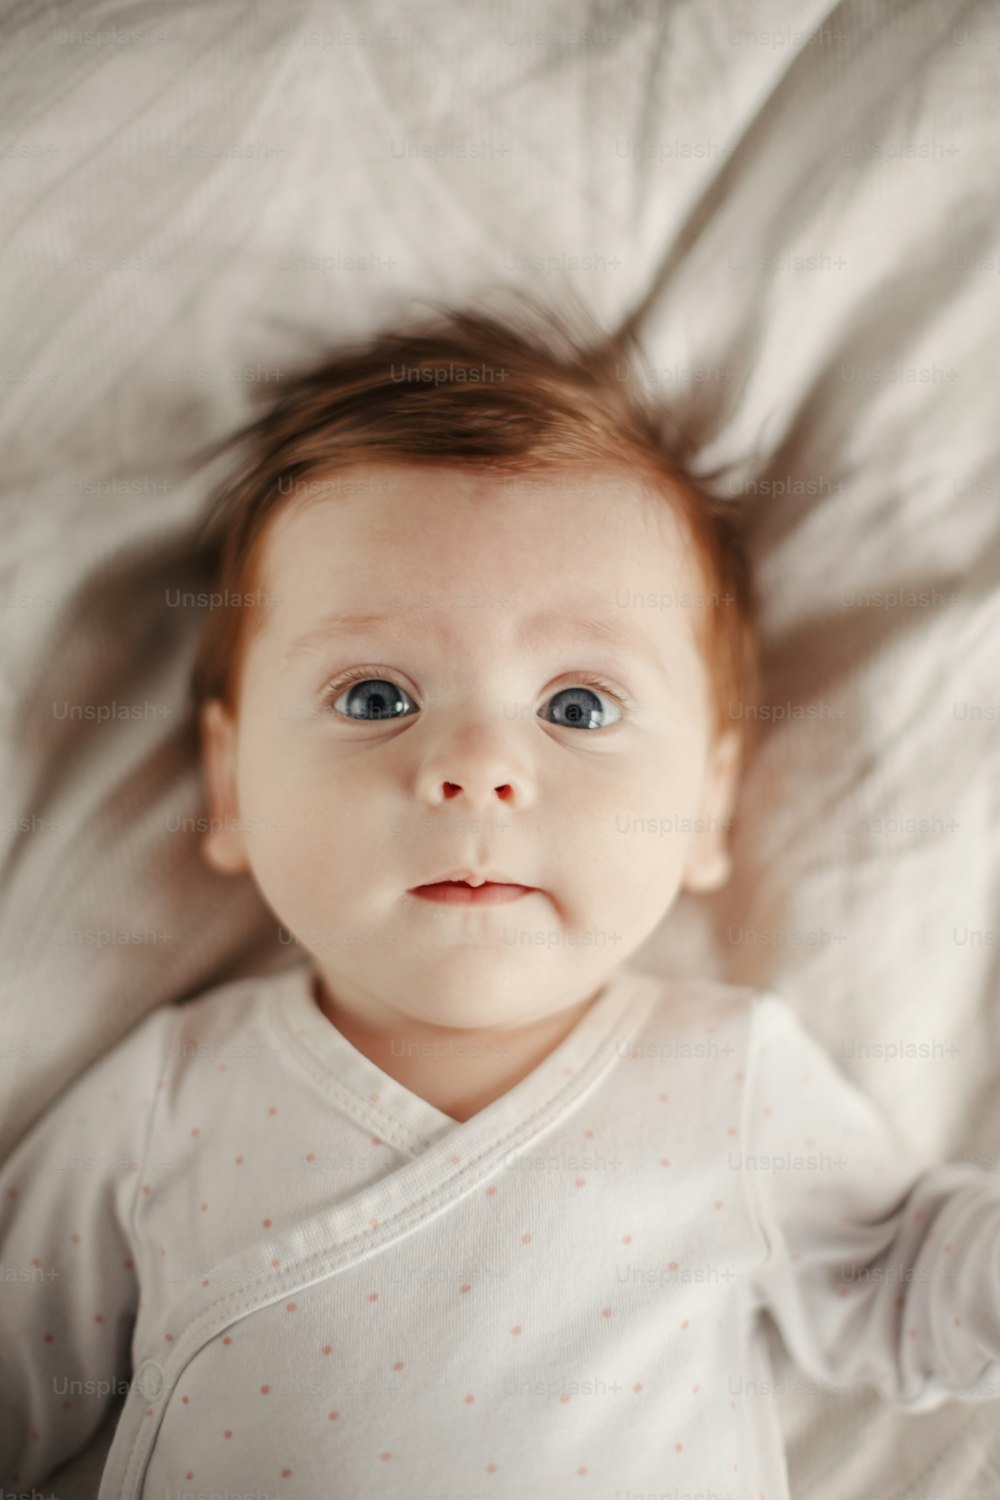 Closeup portrait of cute Caucasian newborn baby. Adorable funny child infant with blue grey eyes and red hair lying on bed looking at camera. Authentic childhood and lifestyle candid moment.